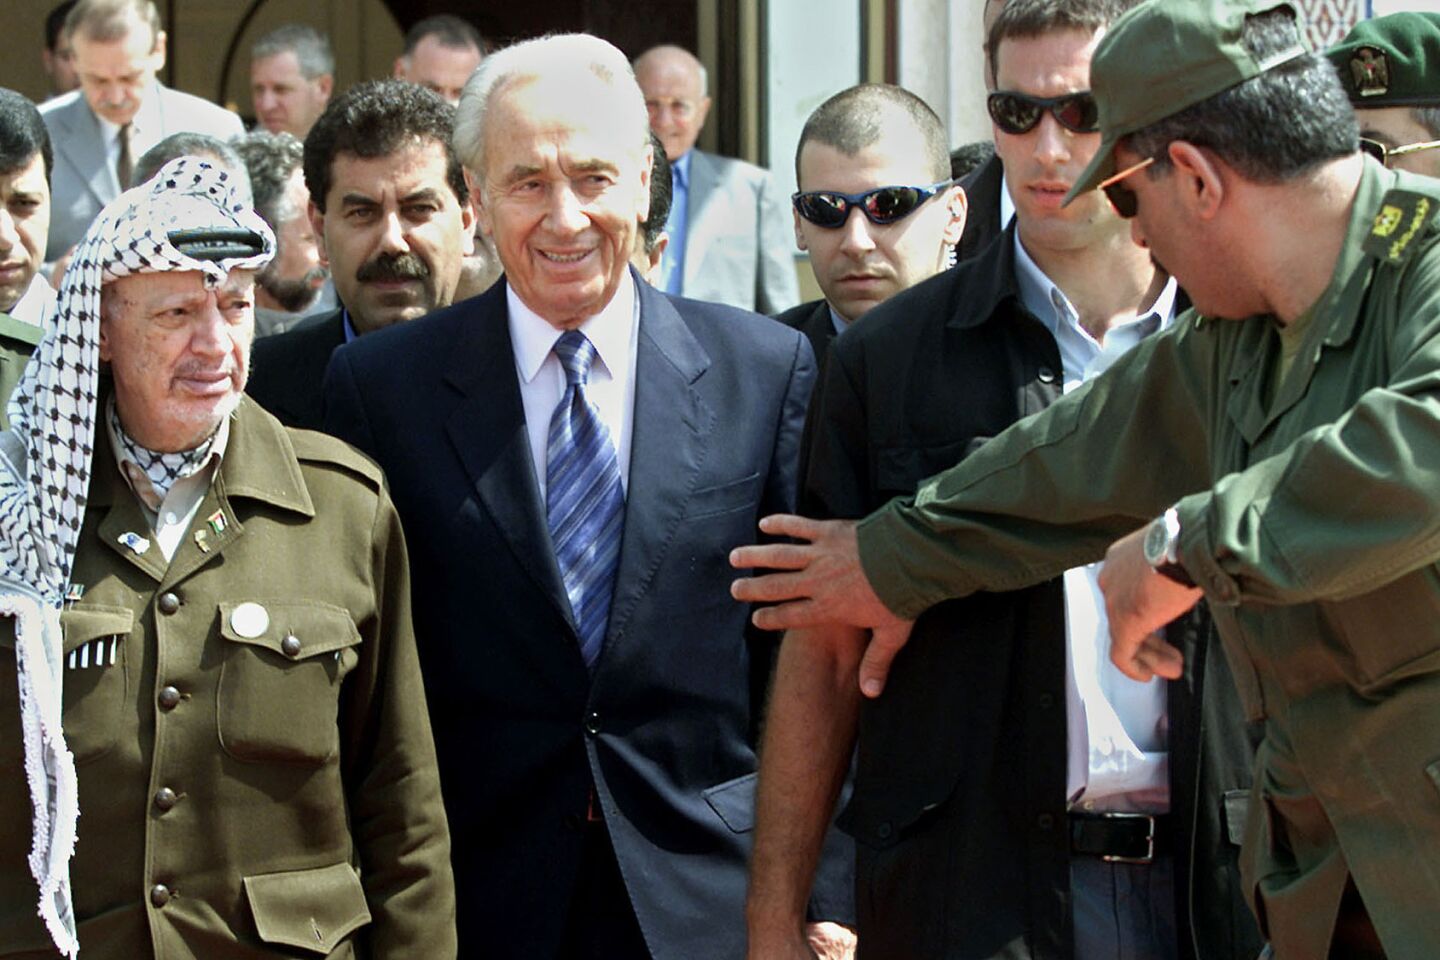 Israeli Foreign Minister Shimon Peres, center, and Palestinian leader Yasser Arafat, left, leave a meeting in the Gaza Strip on Sept. 26, 2001.